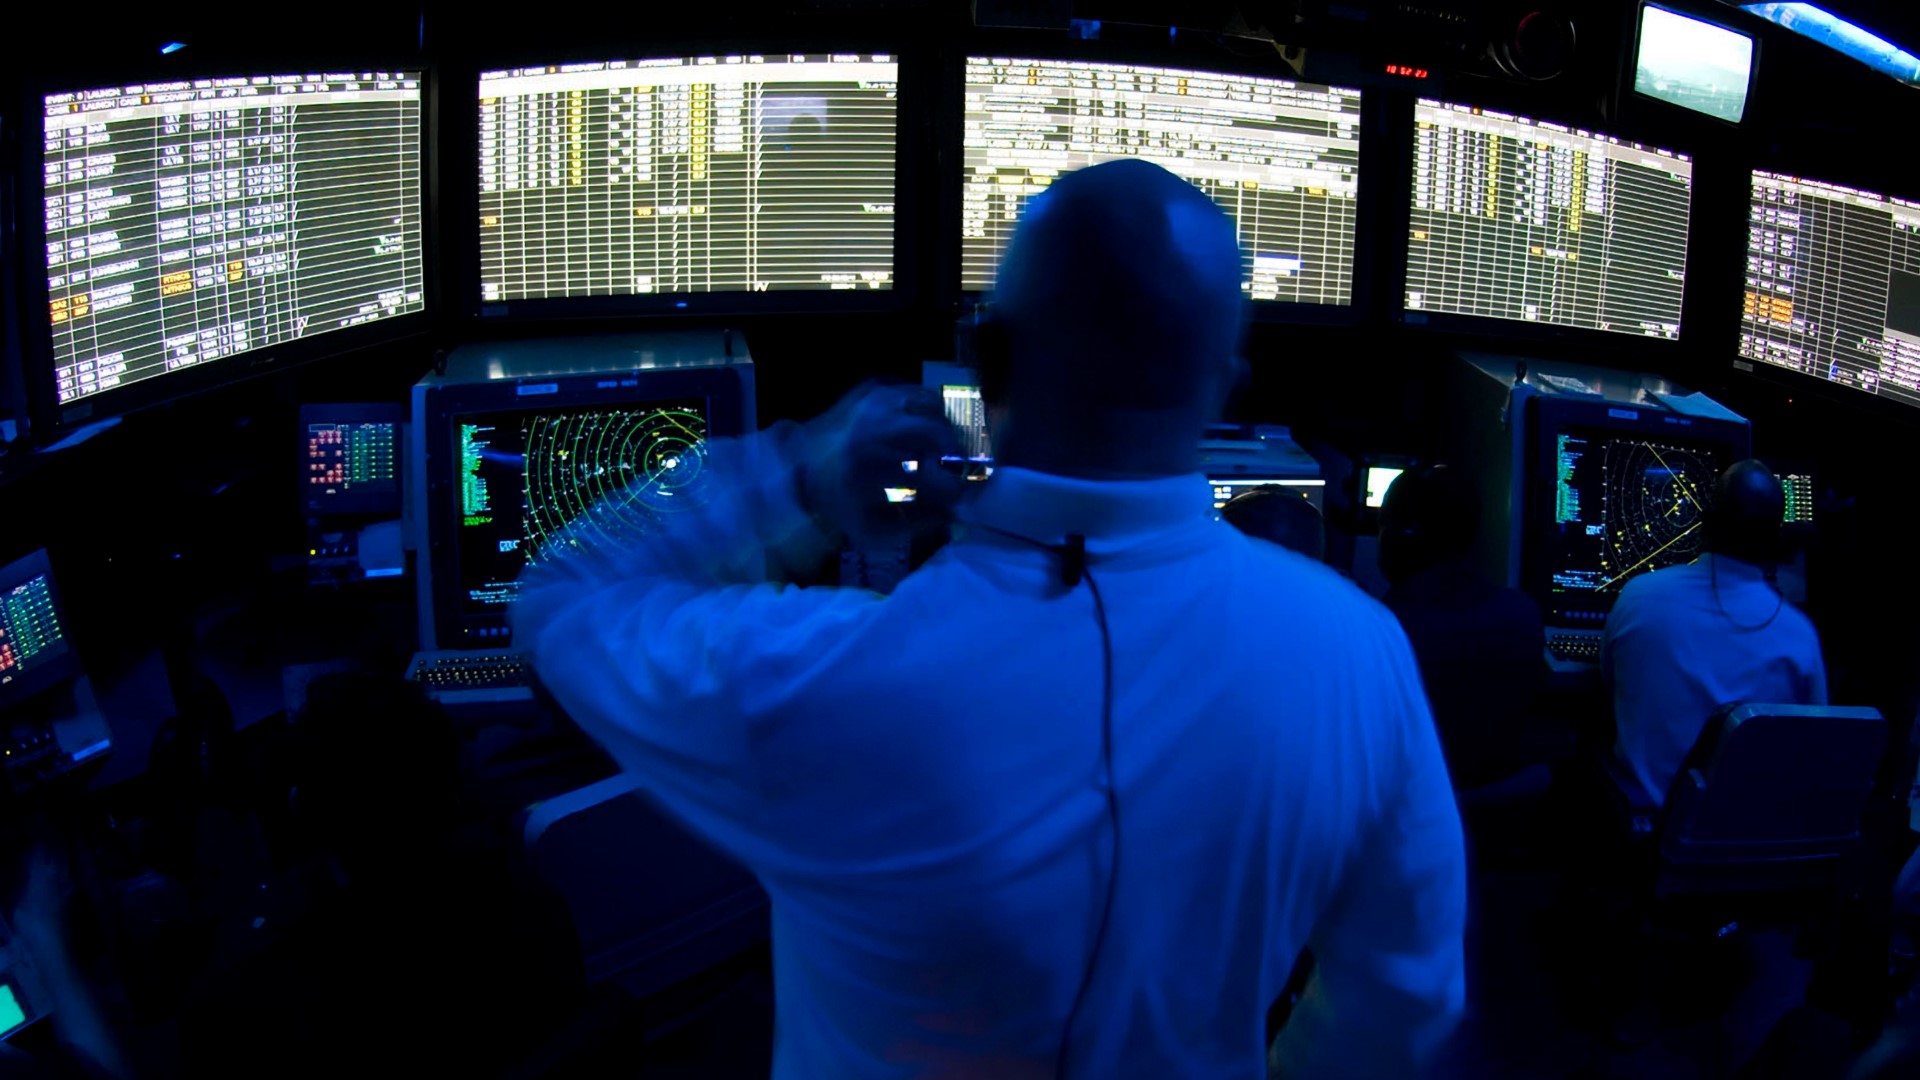 Get ready to take control of your career. The FAA is looking to fill entry-level air traffic control positions.